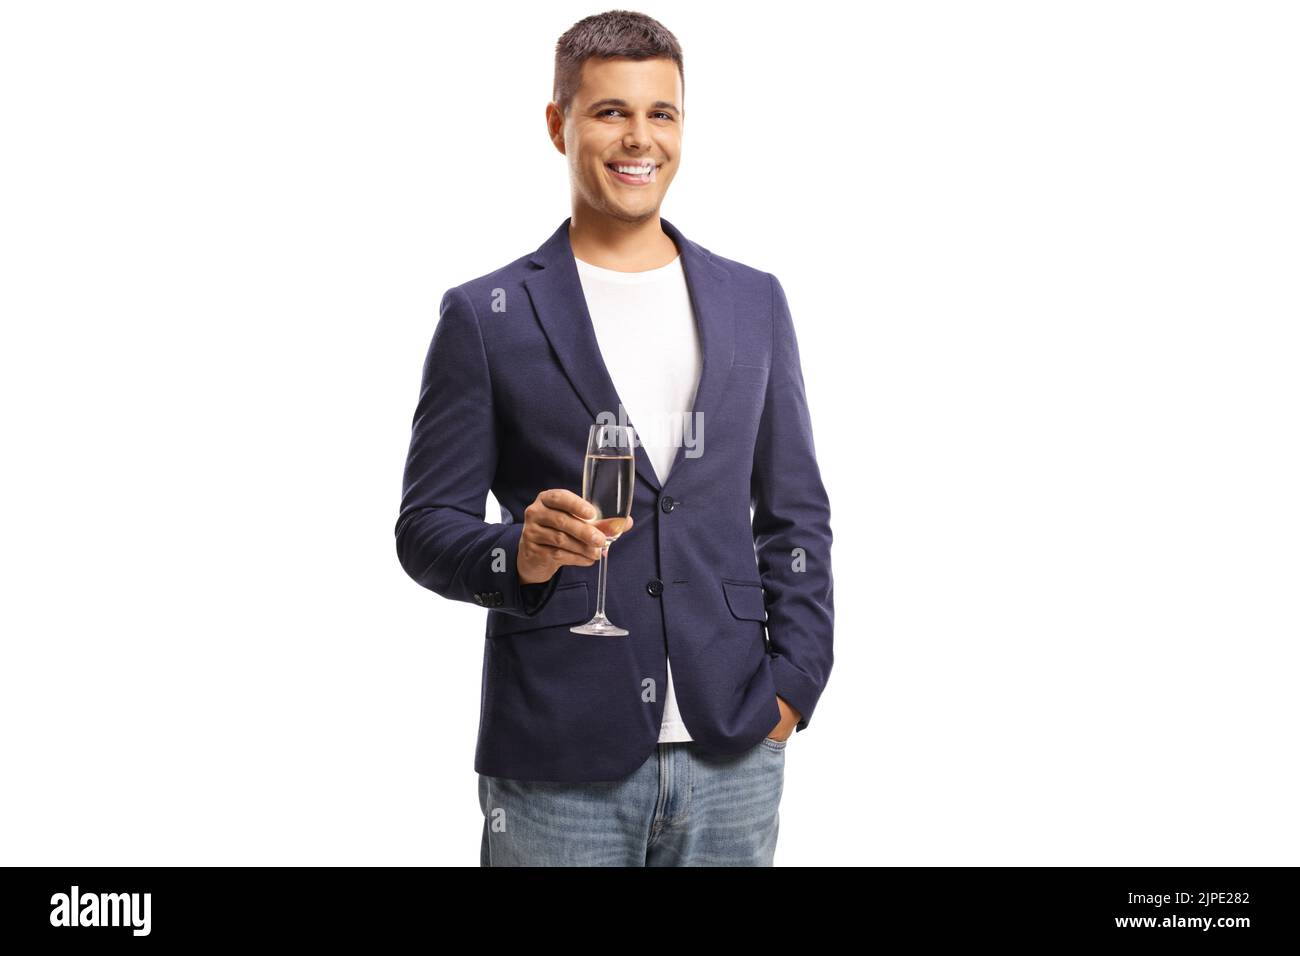 Smiling young man holding a glass of champagne isolated on white background Stock Photo